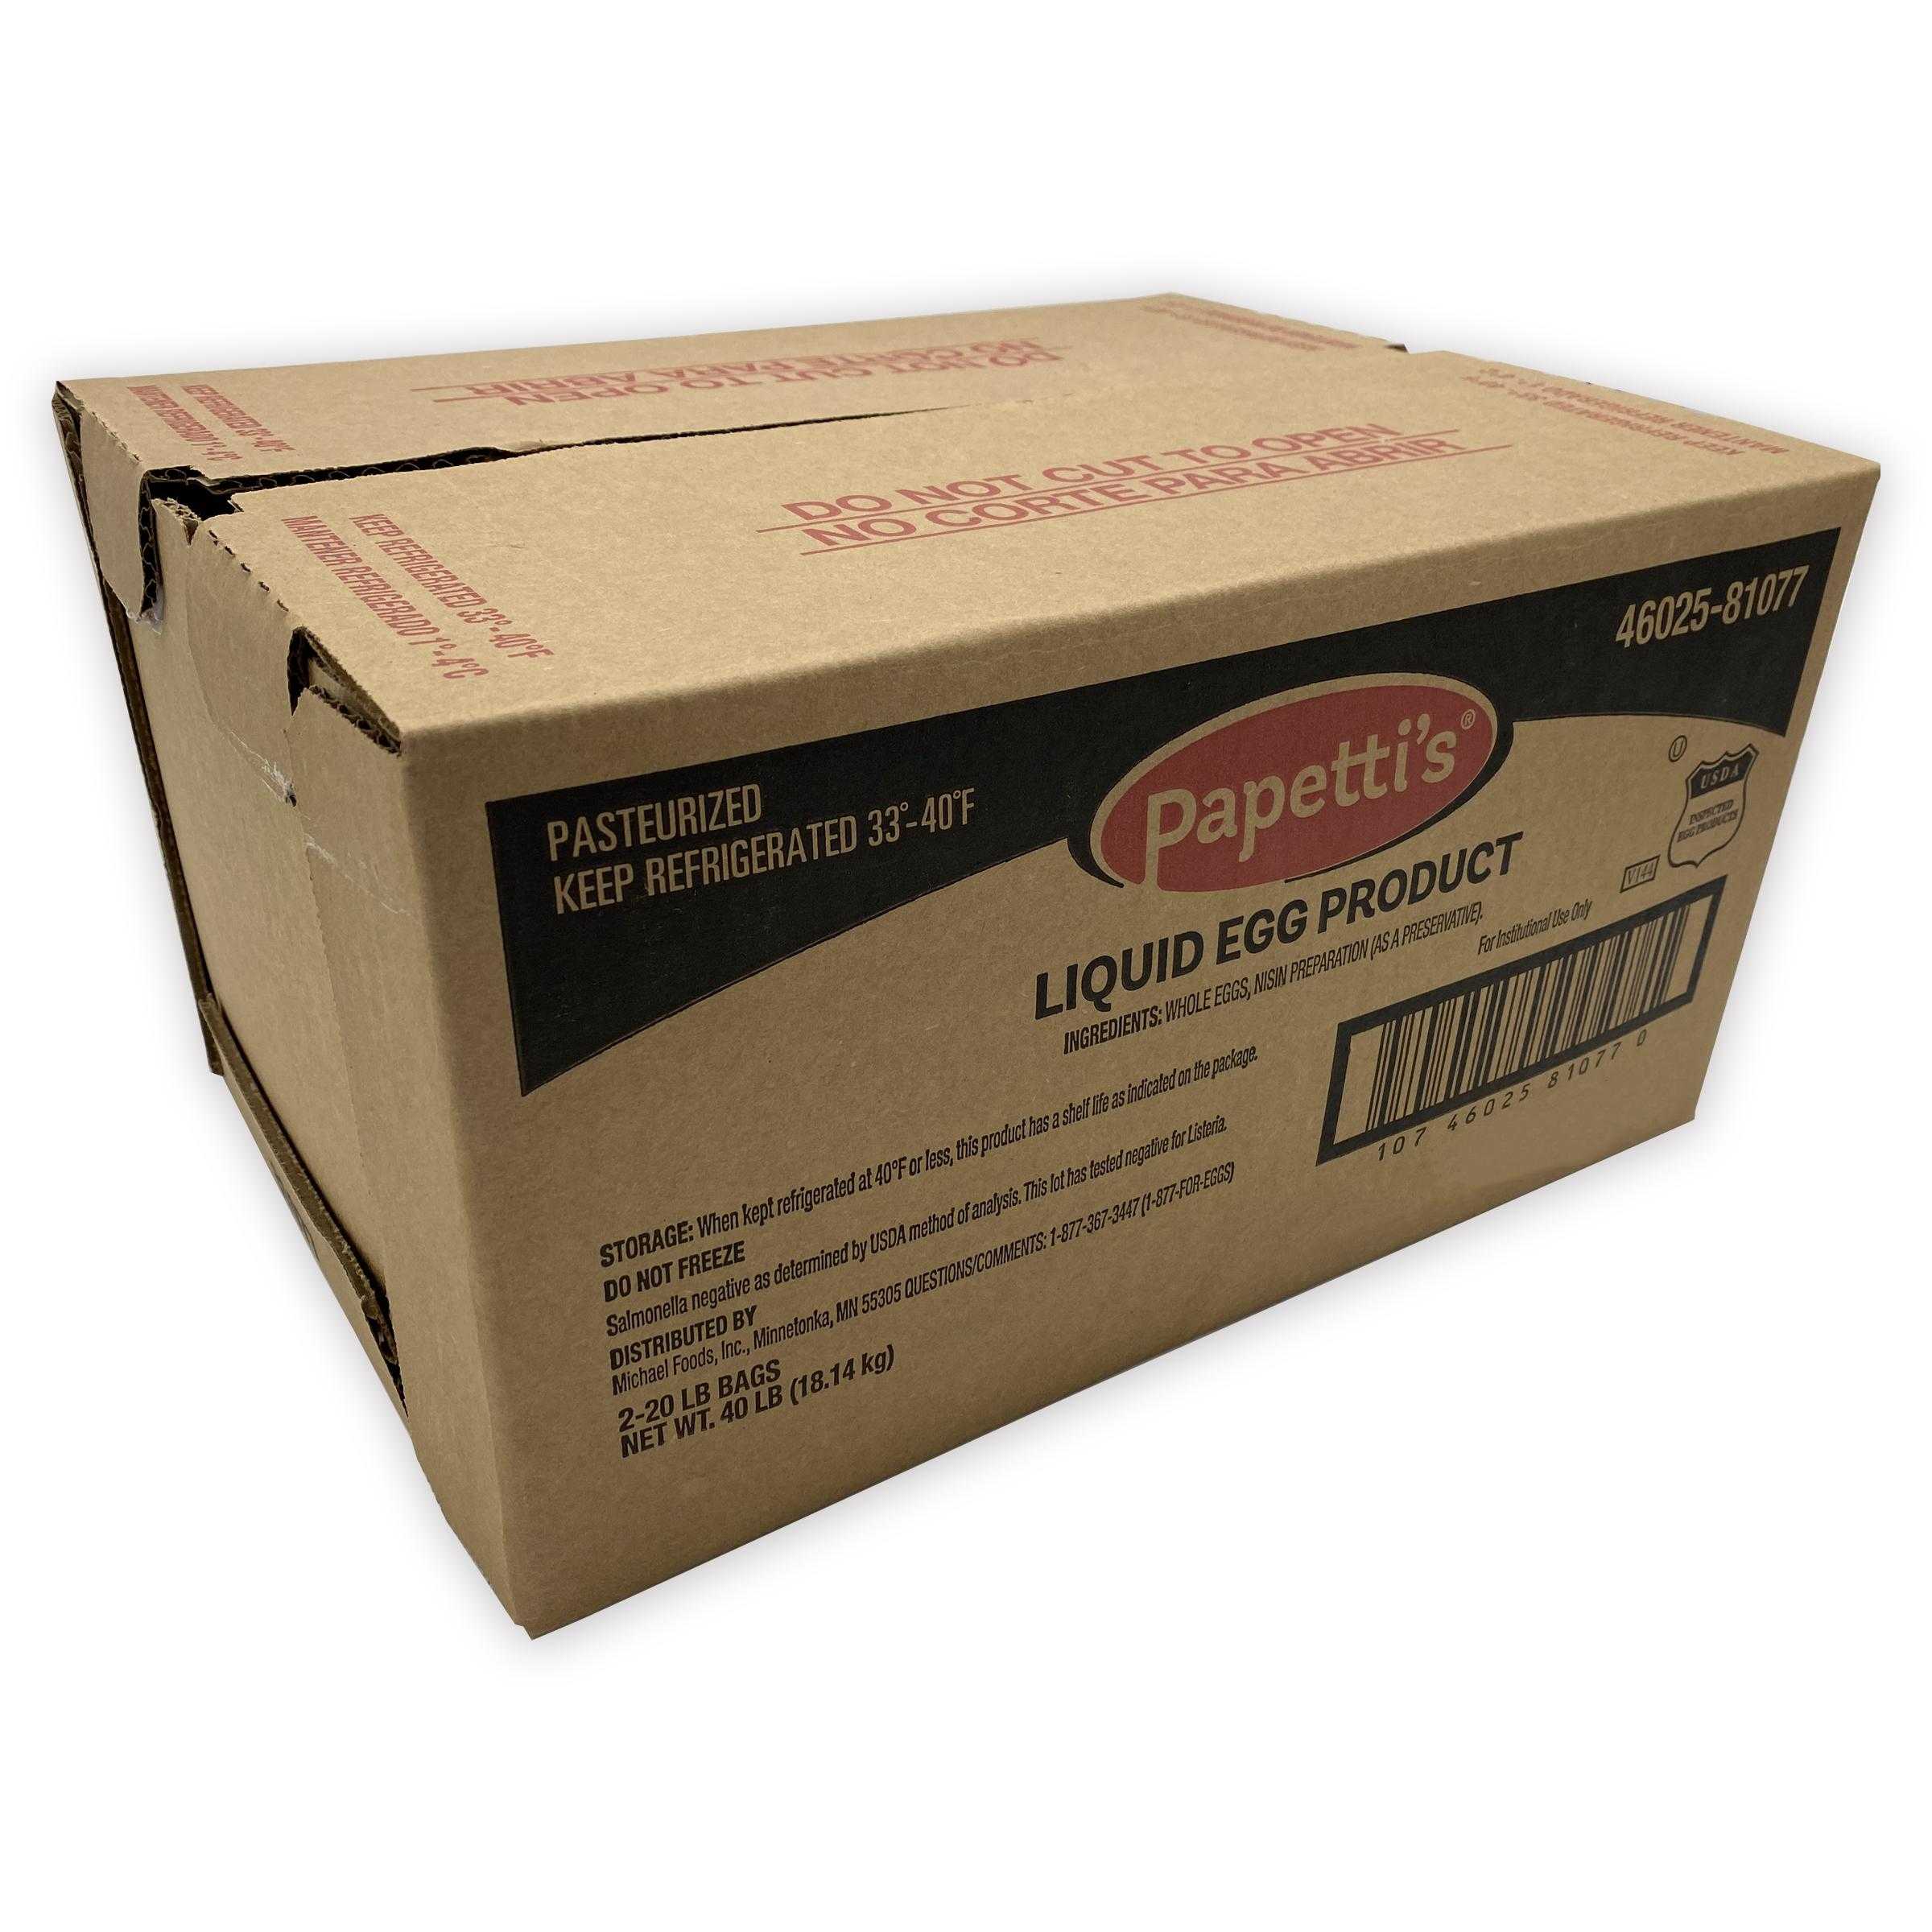 Papetti’s® Refrigerated Liquid Whole Egg with Nisin, 2/20 Lb Bag in Box